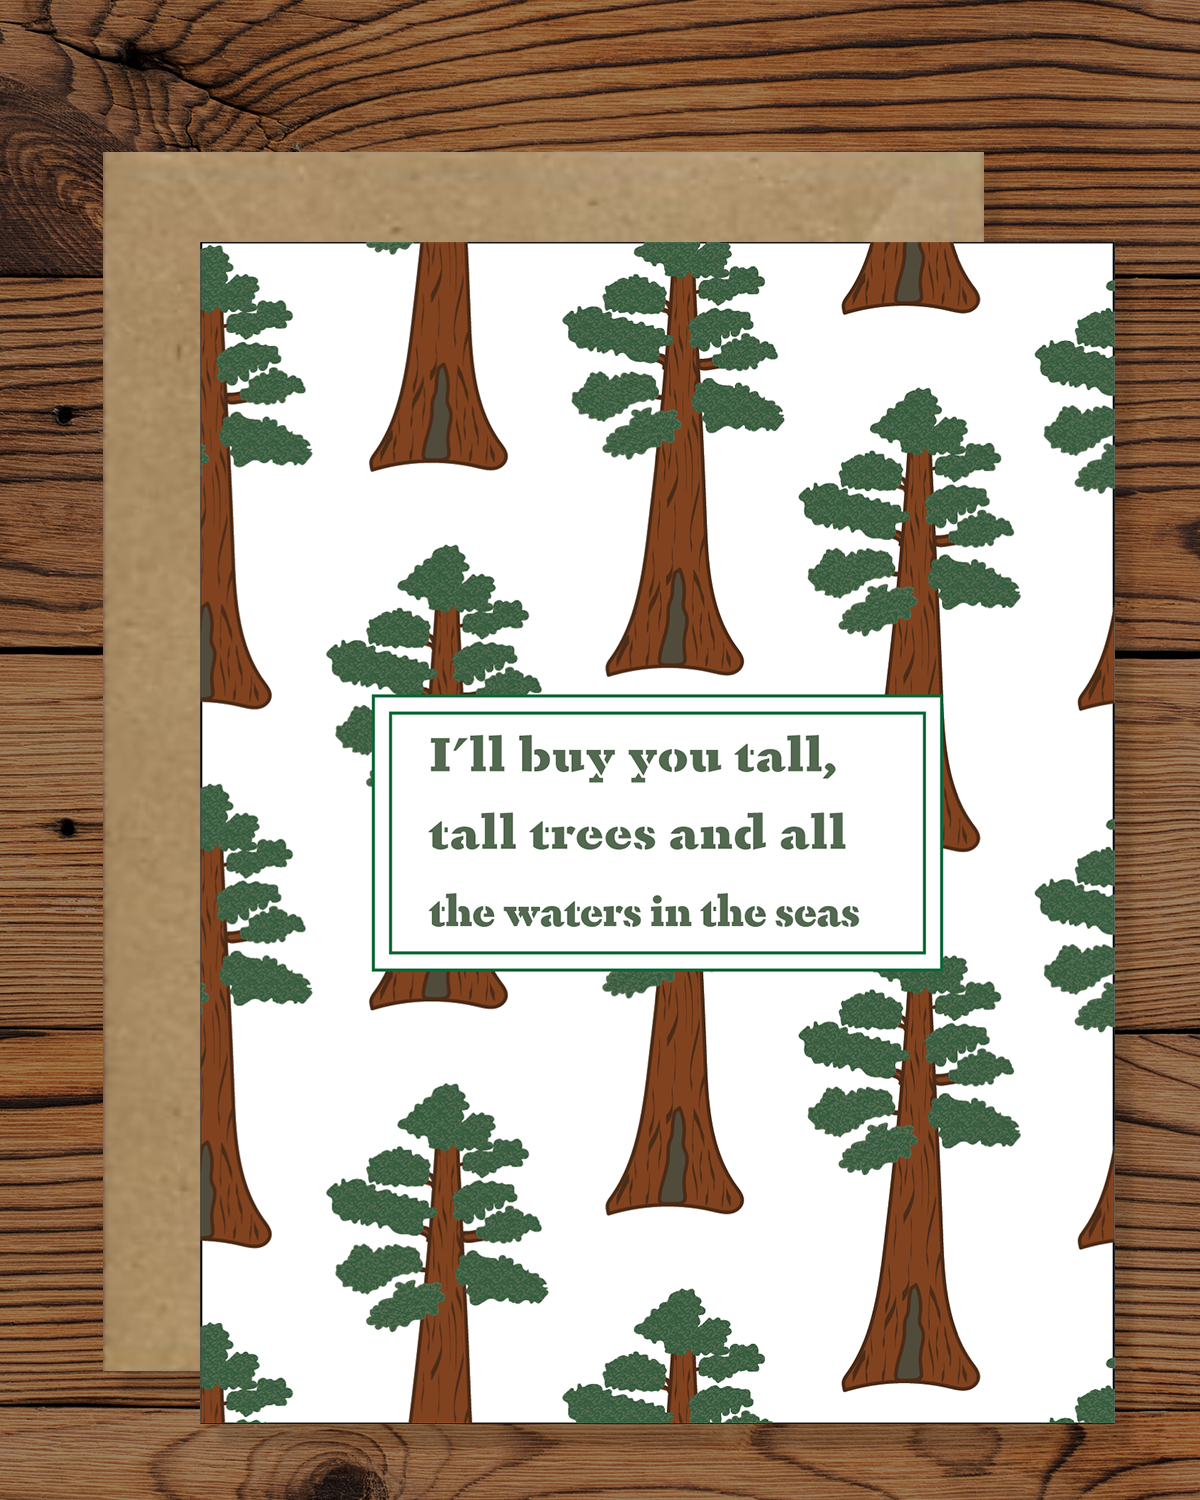 Celebrate the grandeur of nature and the depth of your love with our magnificent Giant Sequoia Greeting Card. Towering majestically, the awe-inspiring Giant Sequoia stands tall as a symbol of strength and enduring affection. With the heartfelt message, "I'll give you tall tall trees and all the waters in the seas," this card expresses a boundless promise of love and devotion.